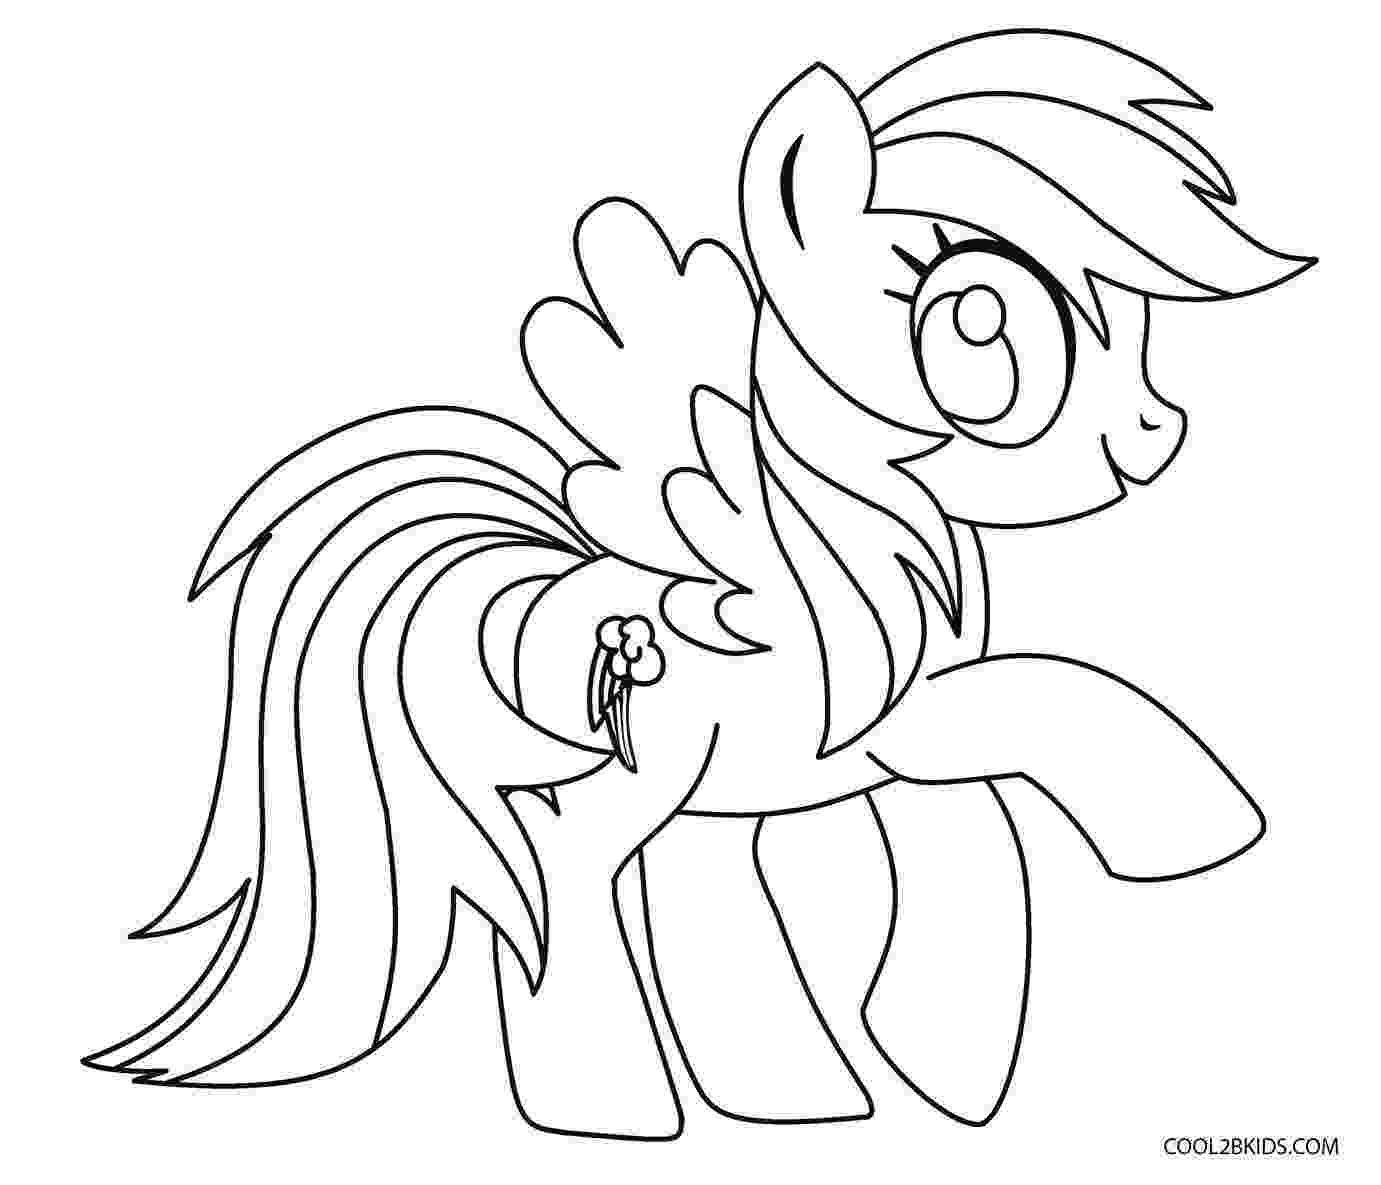 pictures of my little pony to color ponies from ponyville coloring pages free printable pony color little to of pictures my 